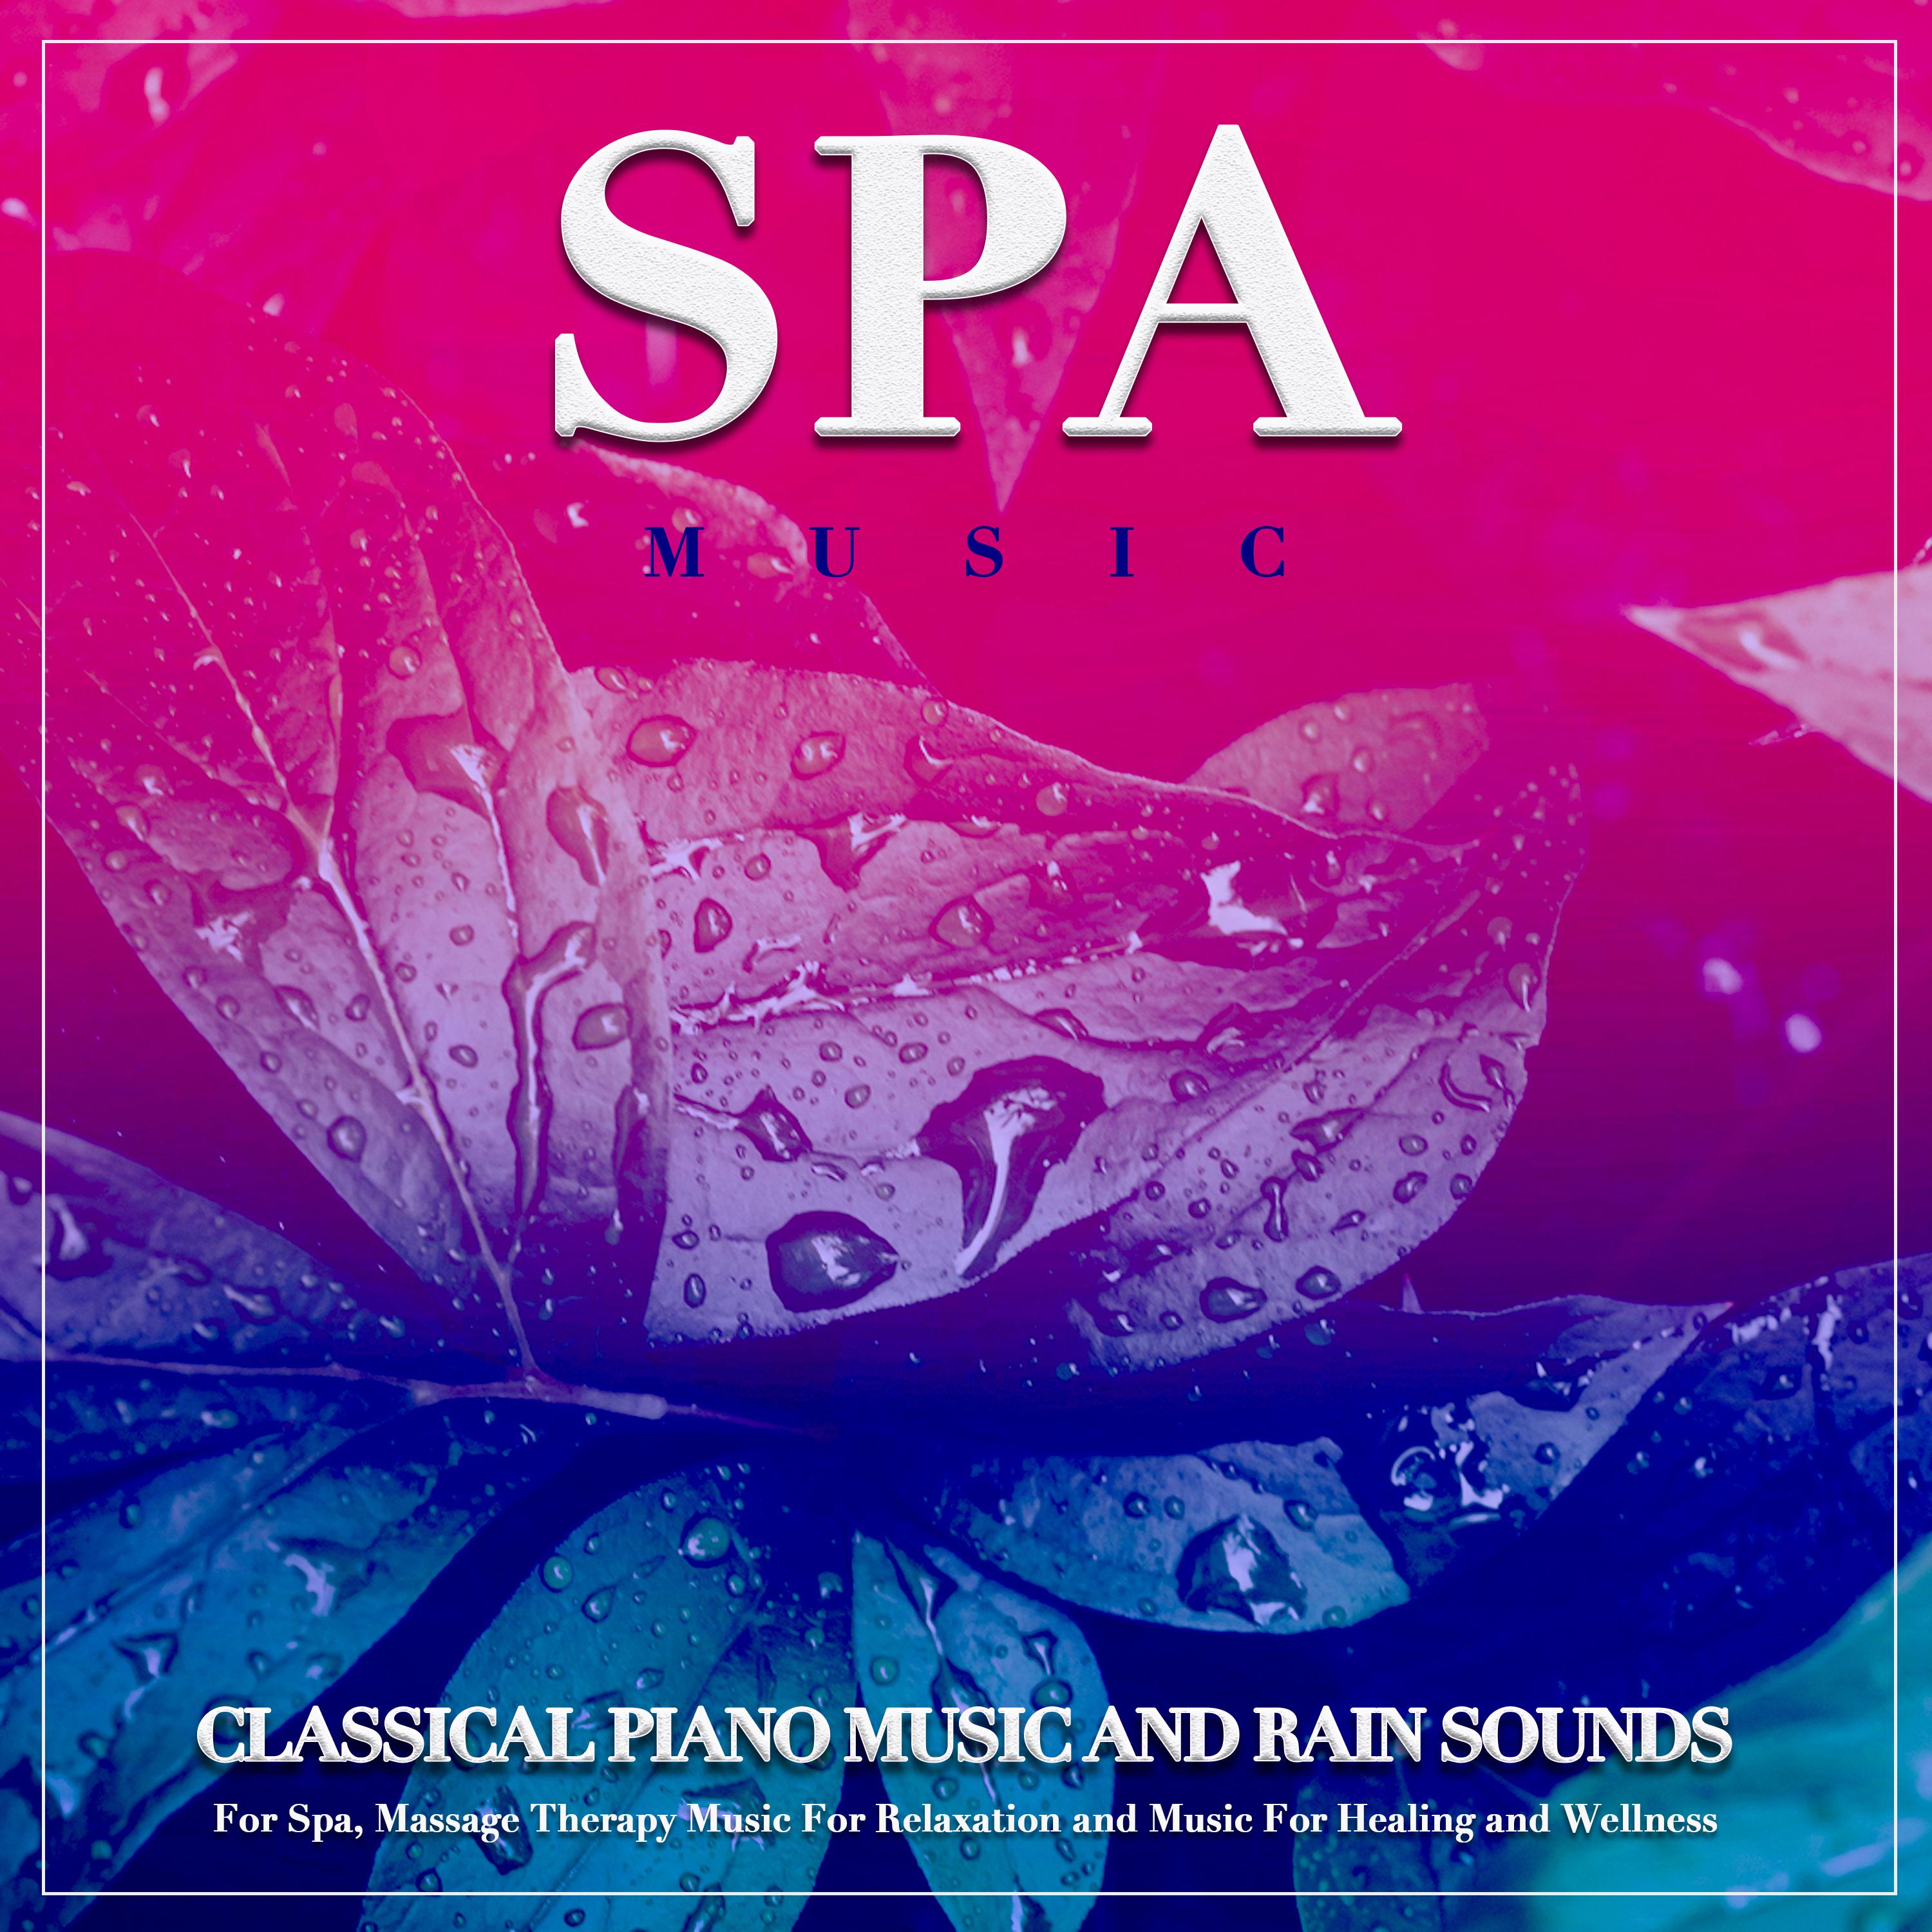 Les Adieux - Beethoven - Classical Piano and Rain Sounds - Spa Music